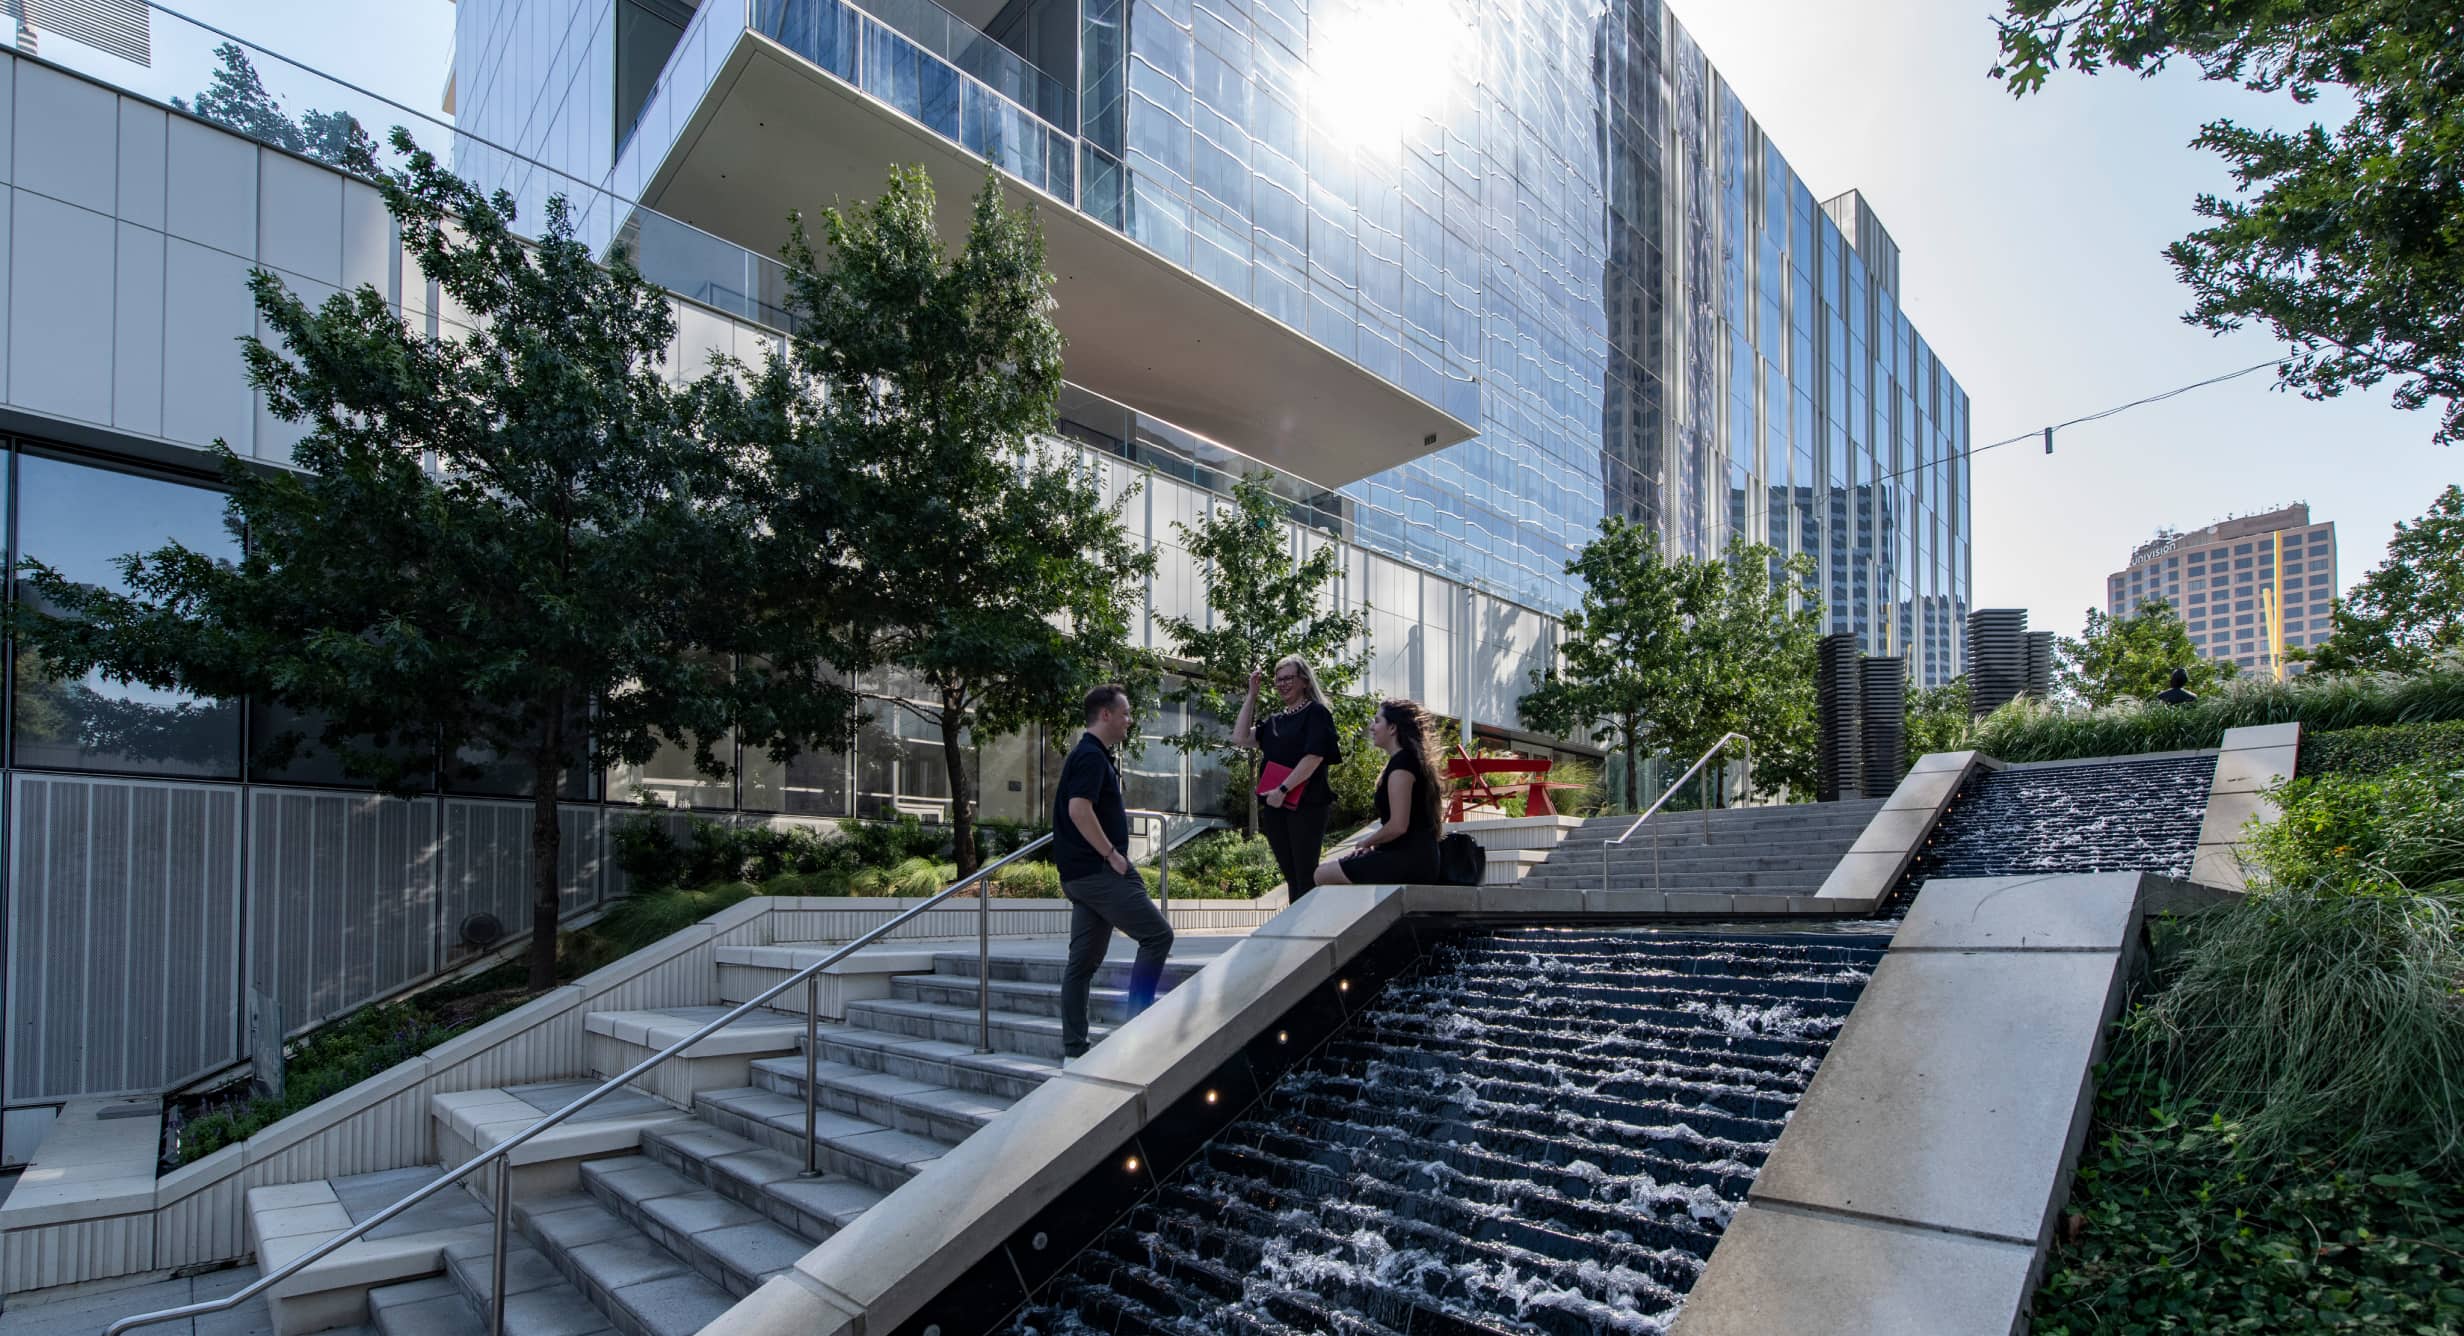 Design for Well-being: HALL Arts Residences Bring Healthier Living to Downtown Dallas